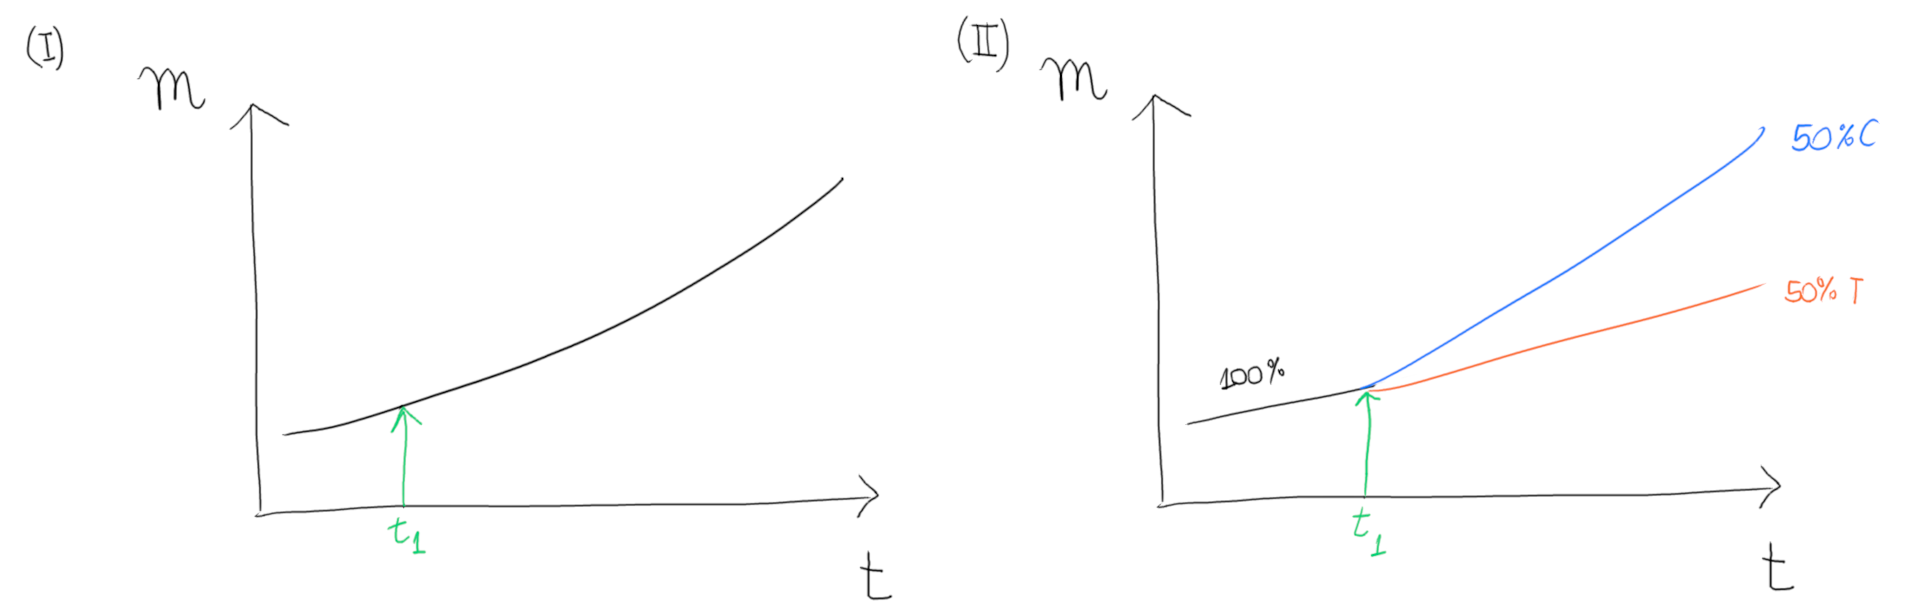 Two side-by-side graphs displaying the evolution of a metric (m) over time (t)